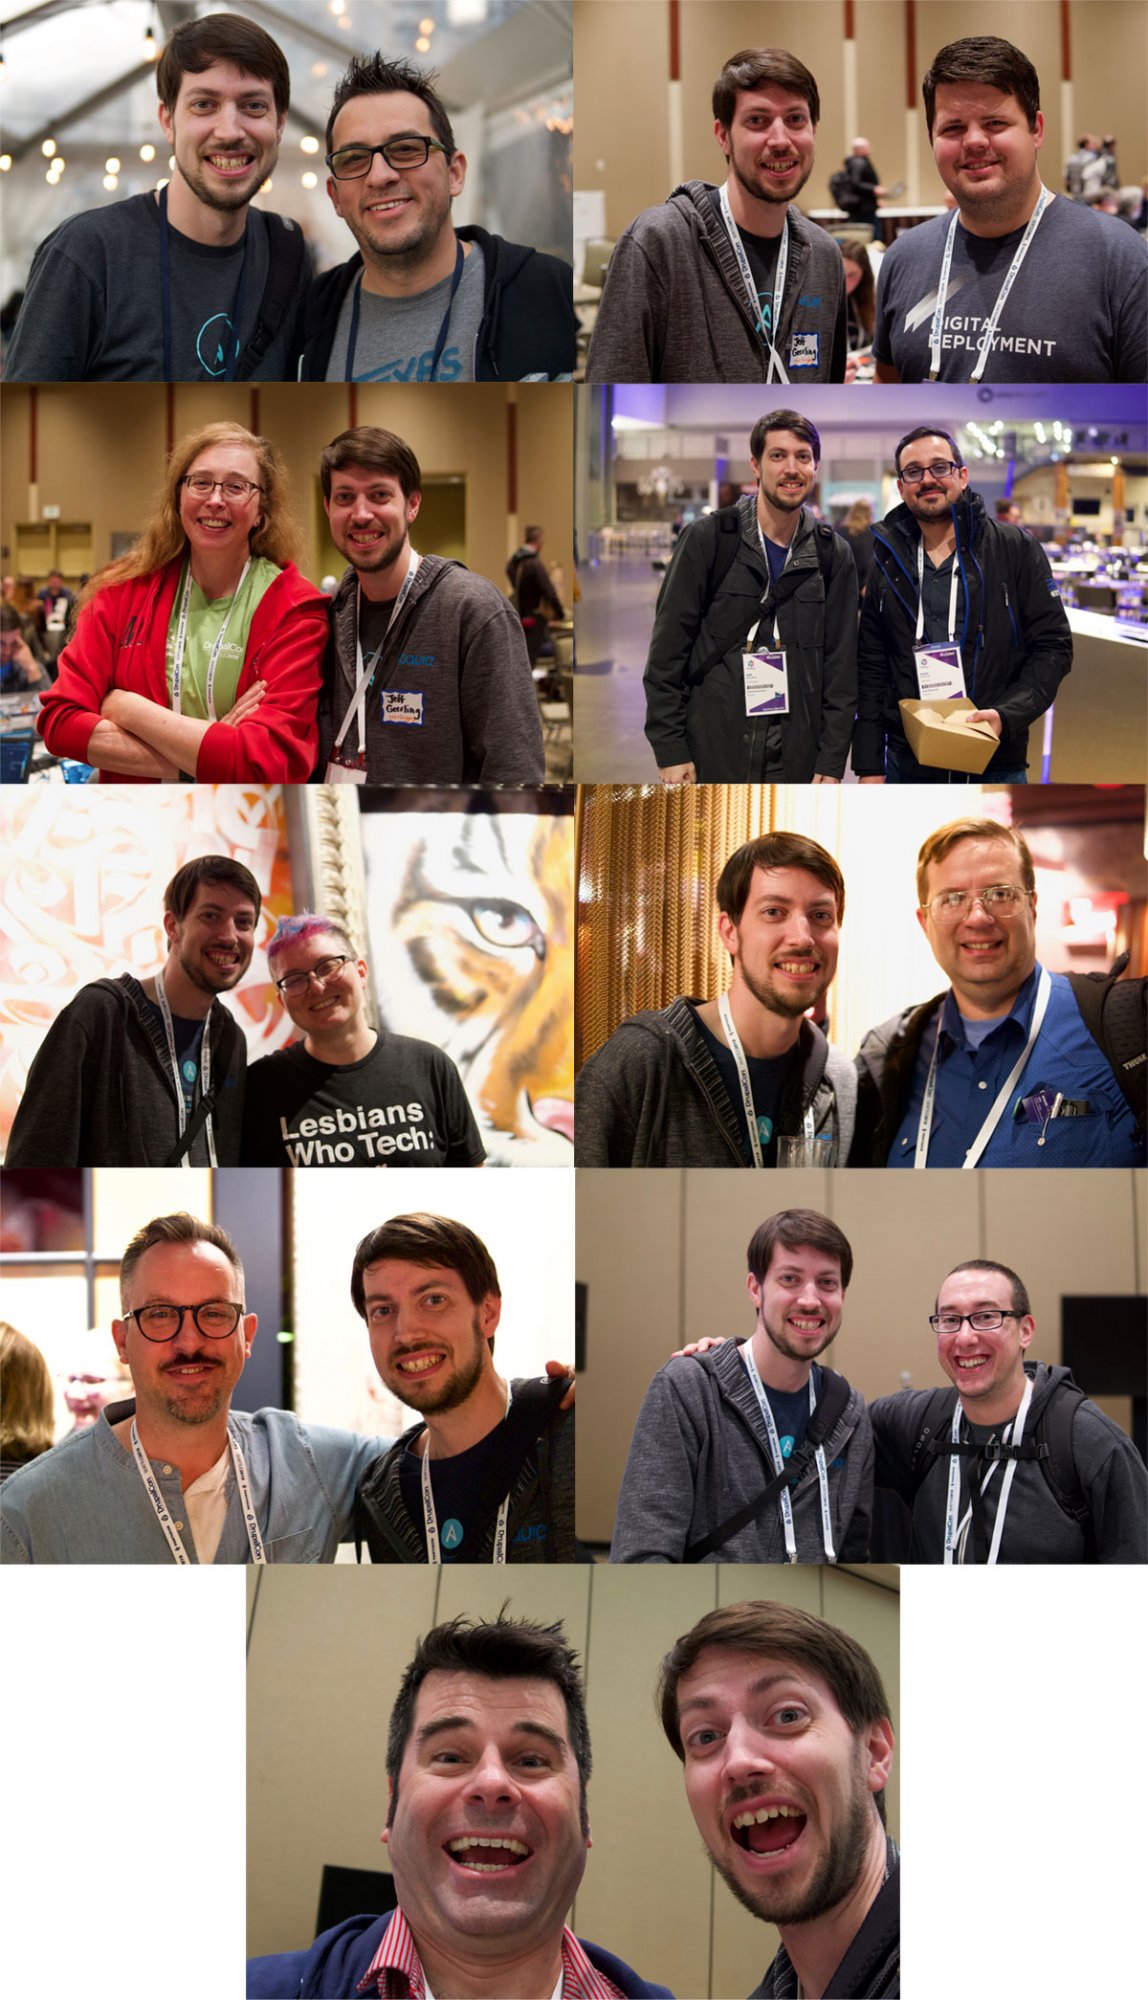 Jeff with People at DrupalCon Seattle 2019